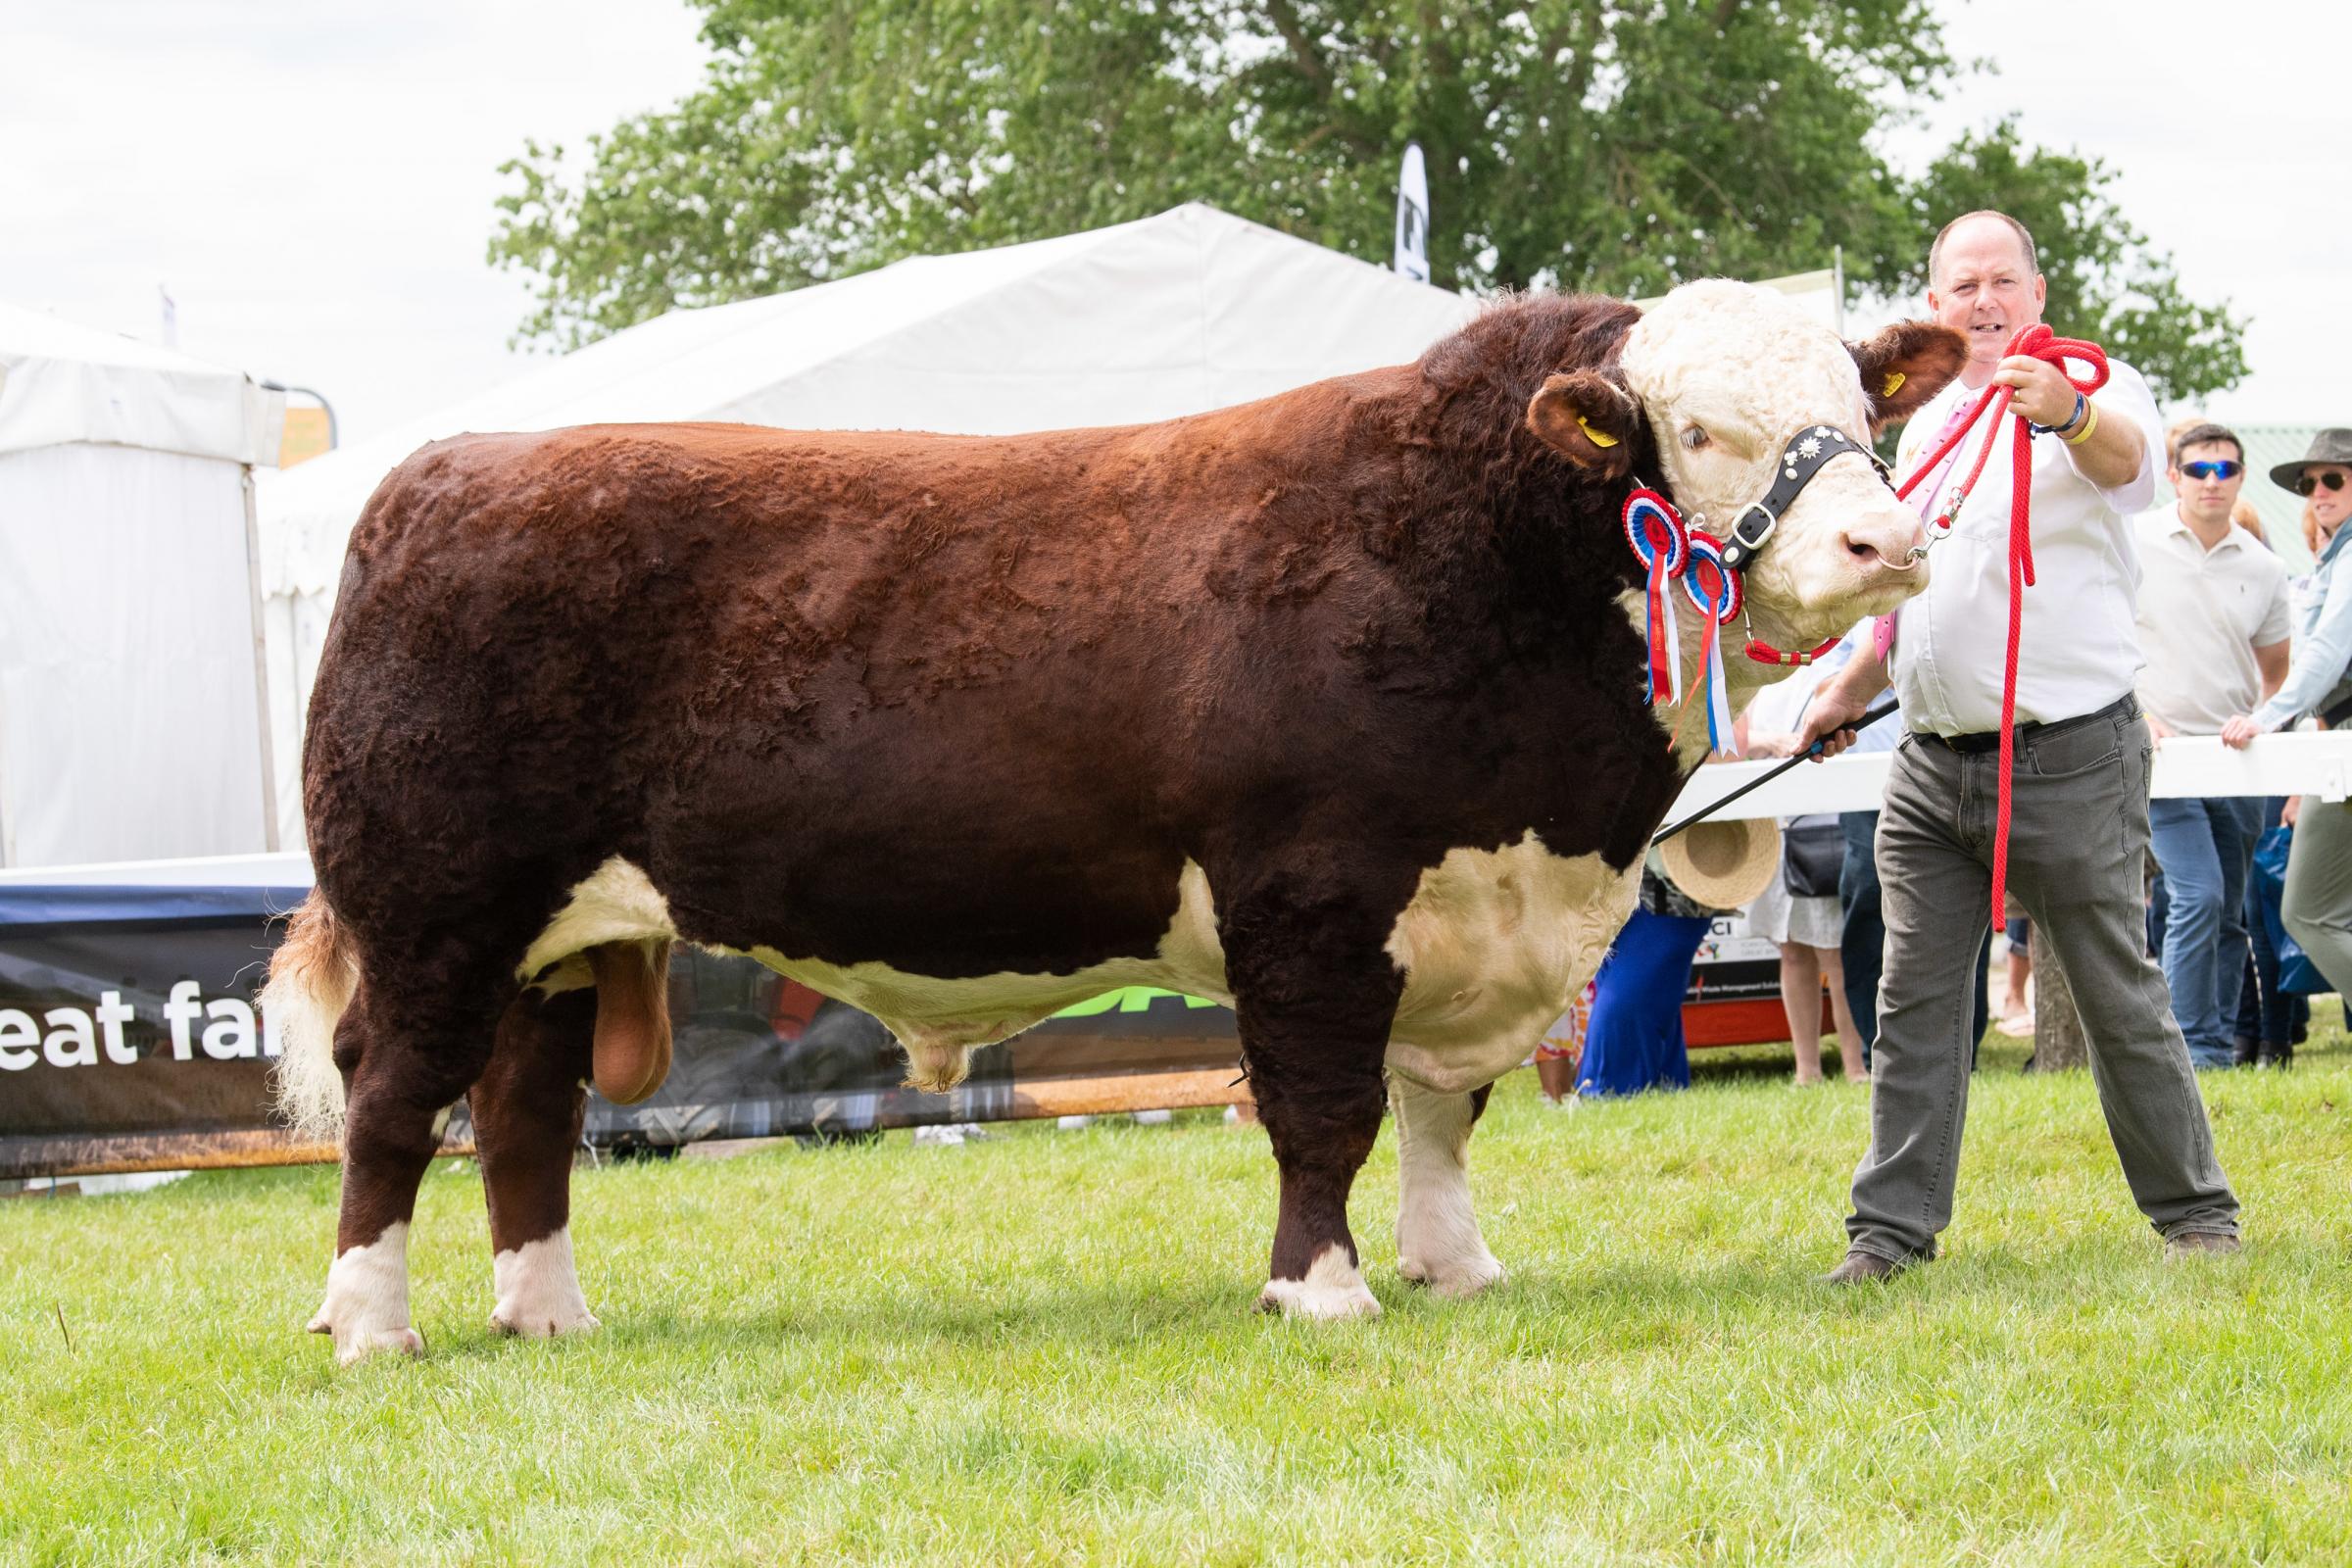 Hereford champion came from Tom and Di Harrison Ref:RH150721063 Rob Haining / The Scottish Farmer...